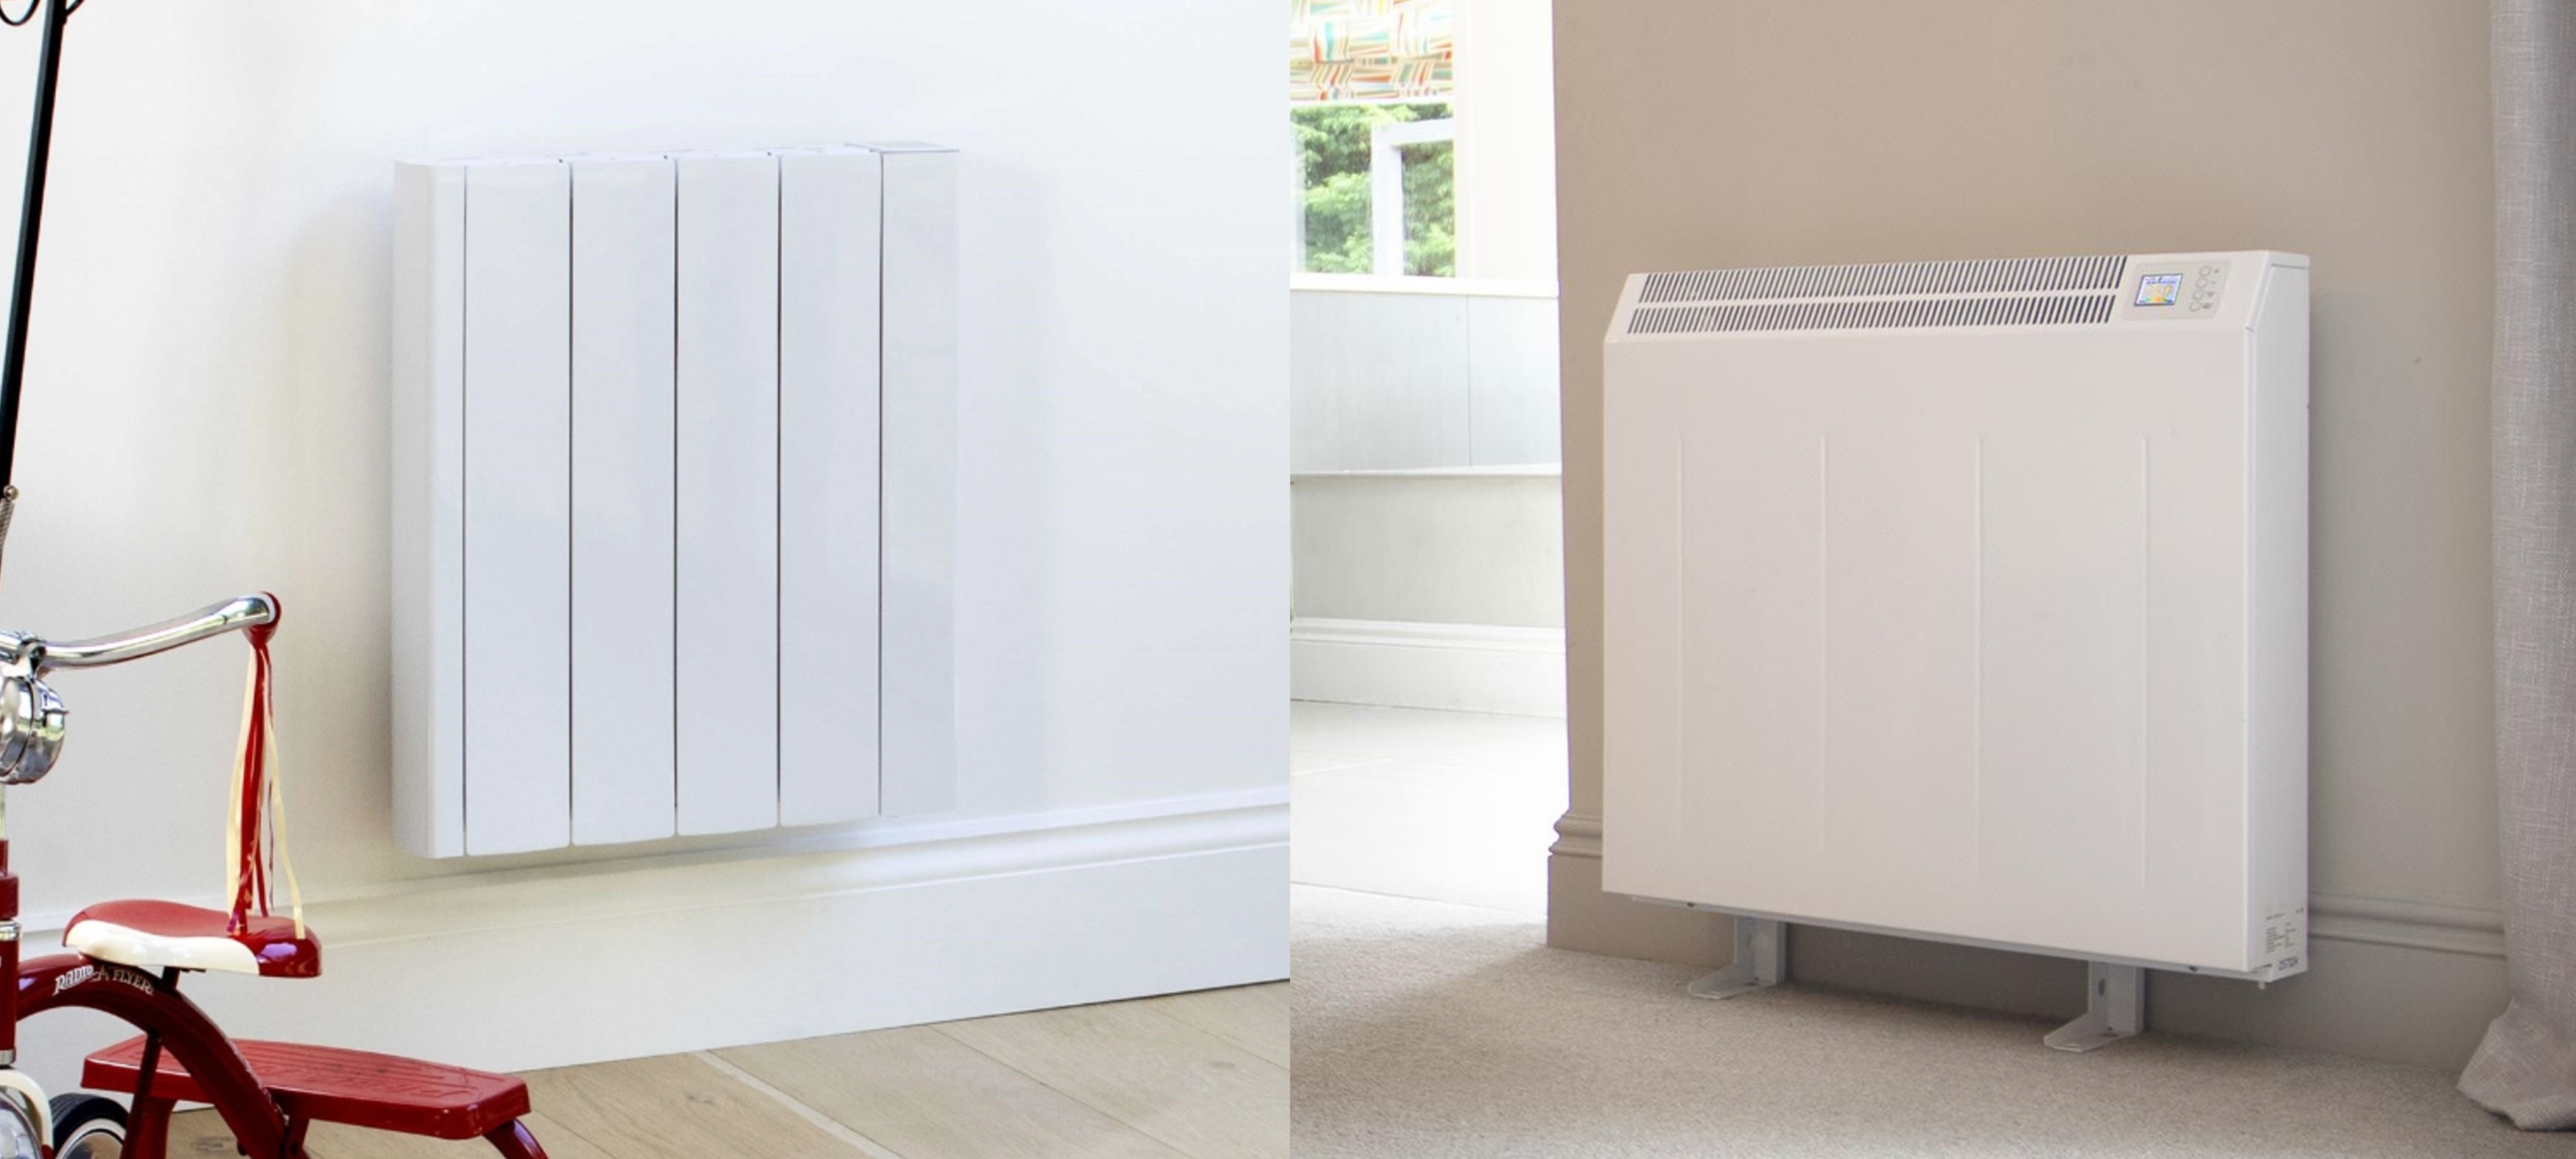 Ceramic electric radiators vs. storage heaters: which is best? - Ecostrad